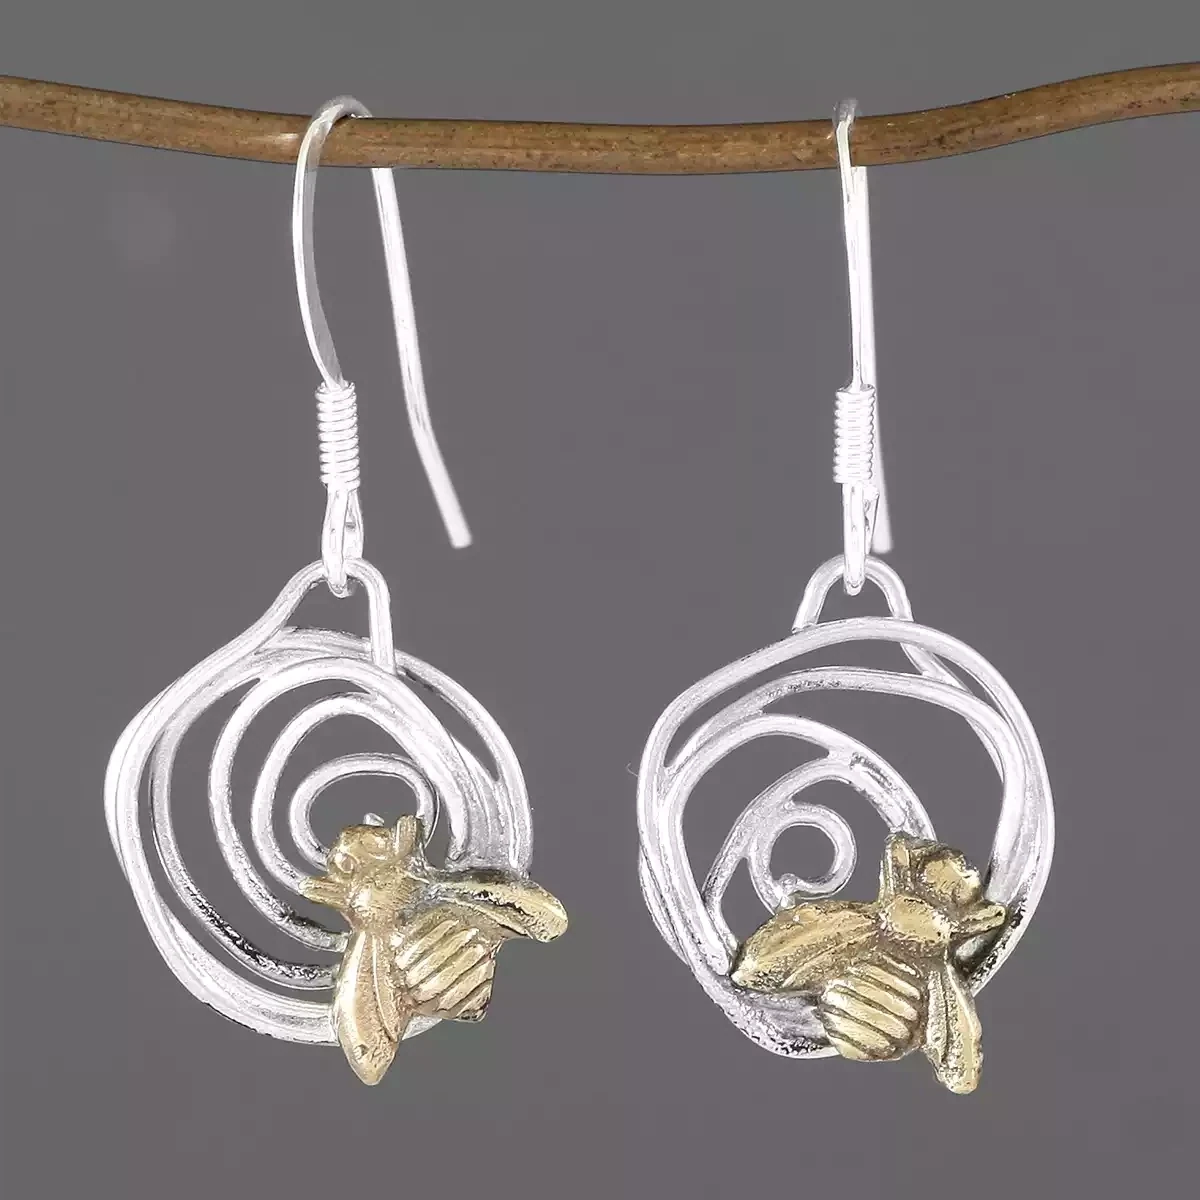 Busy Bee Silver and Bronze Drop Earrings by Xuella Arnold